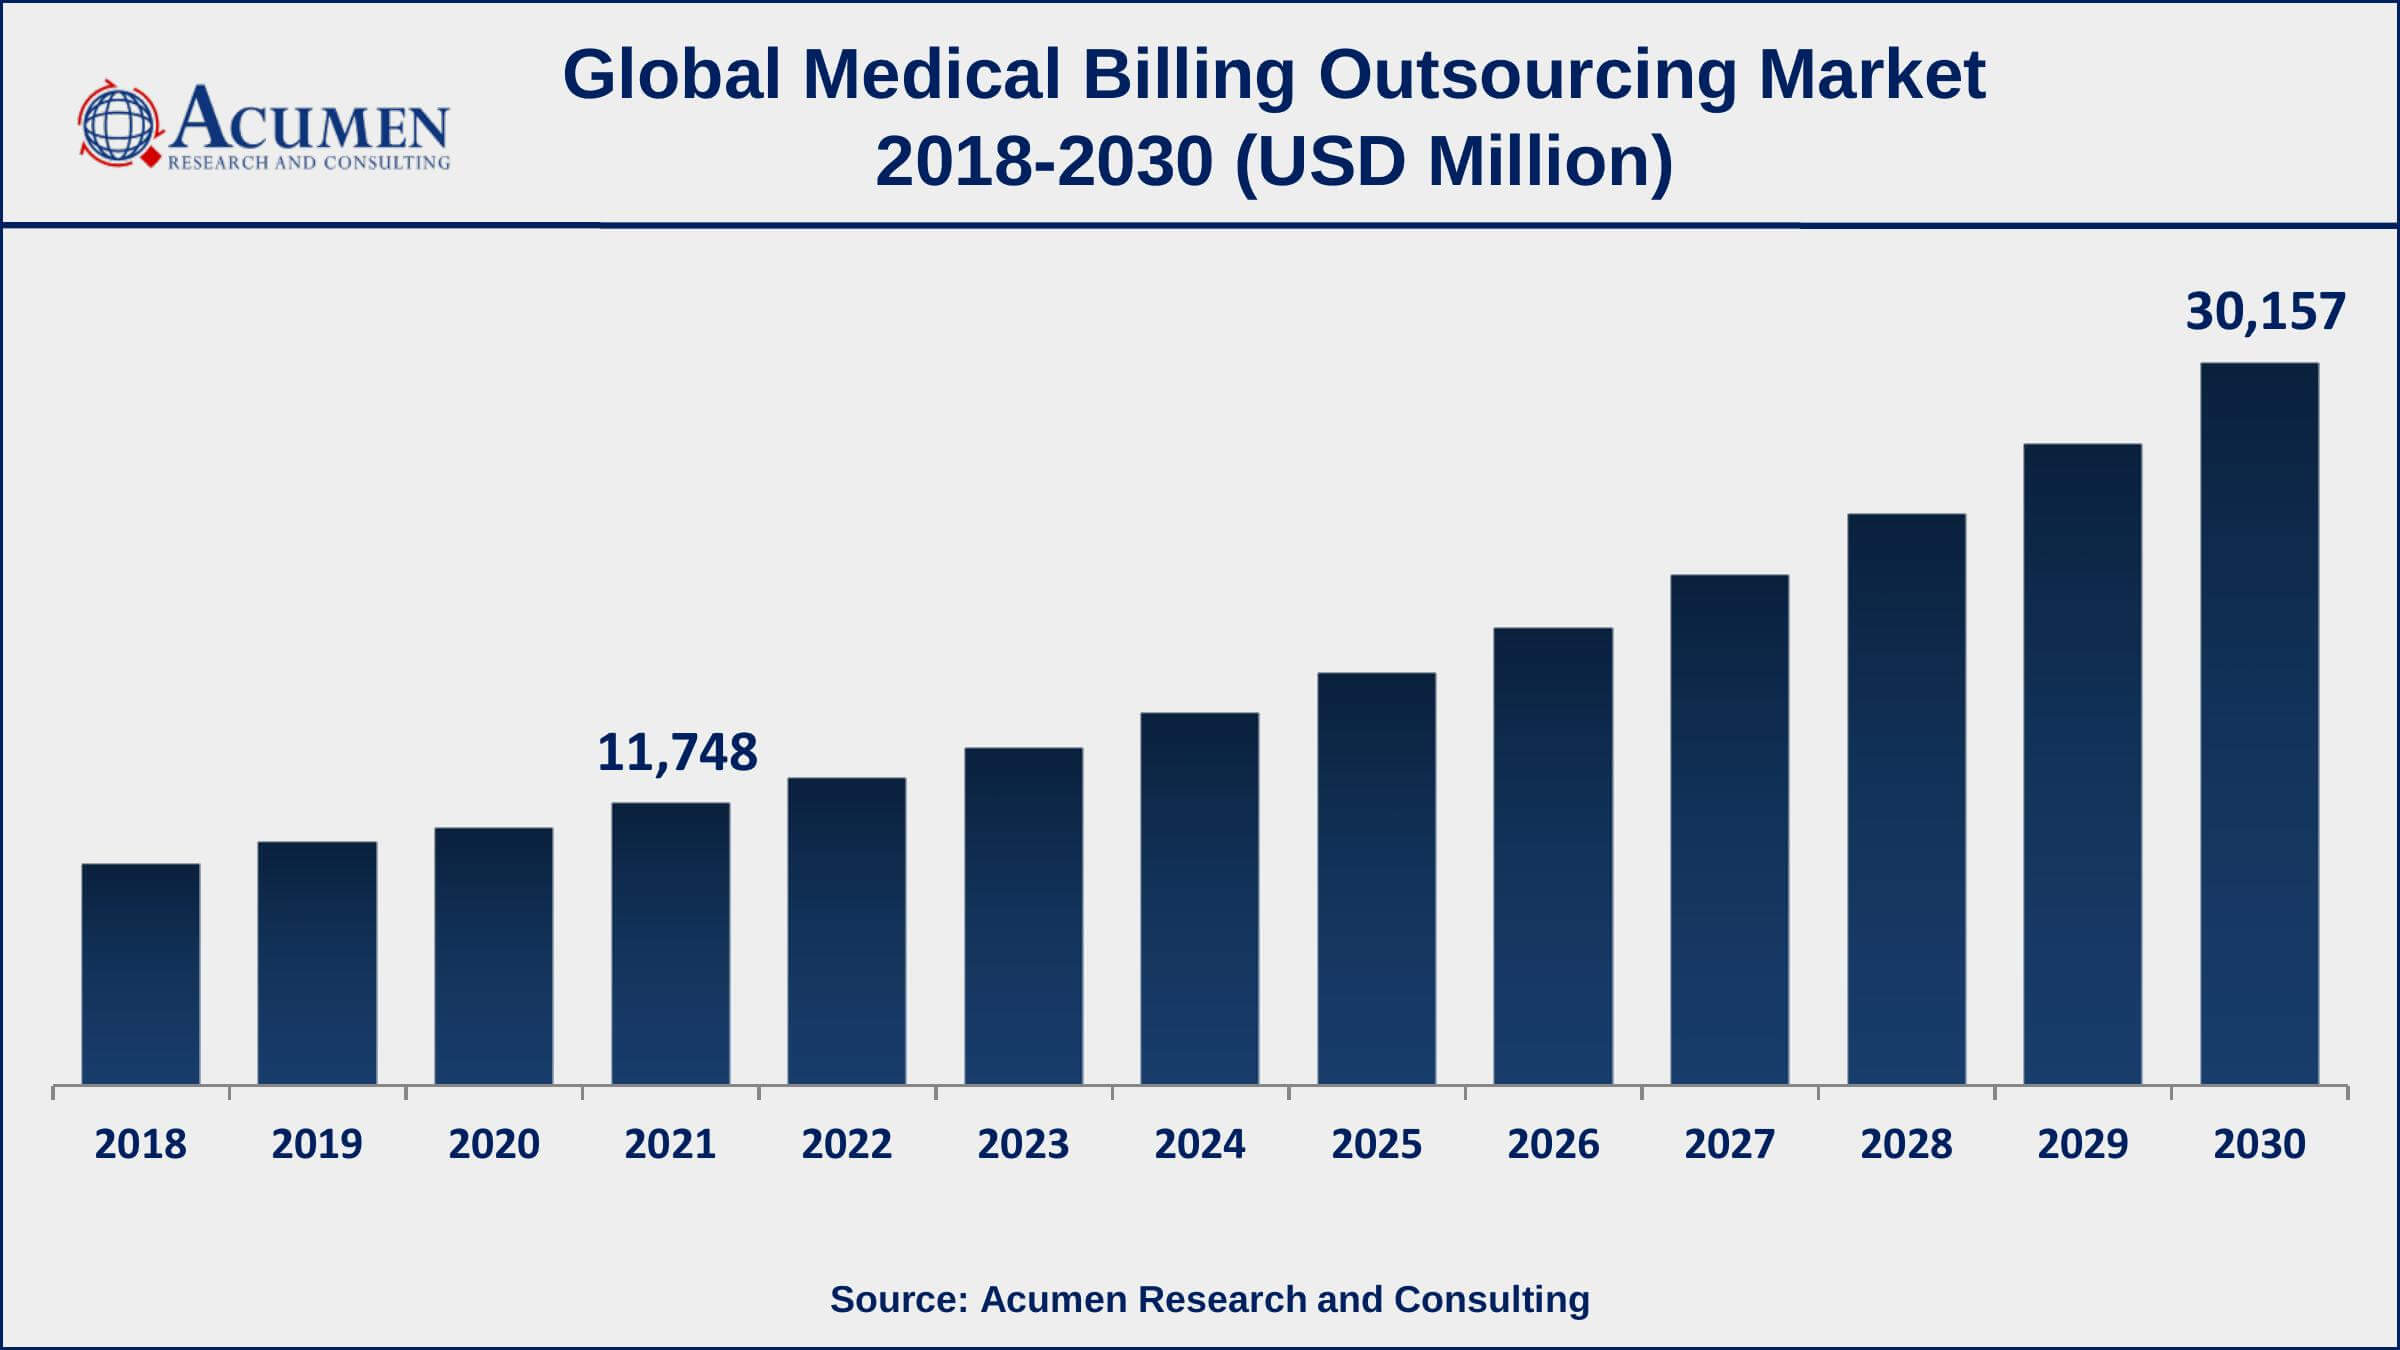 Asia-Pacific medical billing outsourcing market growth will observe strongest CAGR from 2022 to 2030